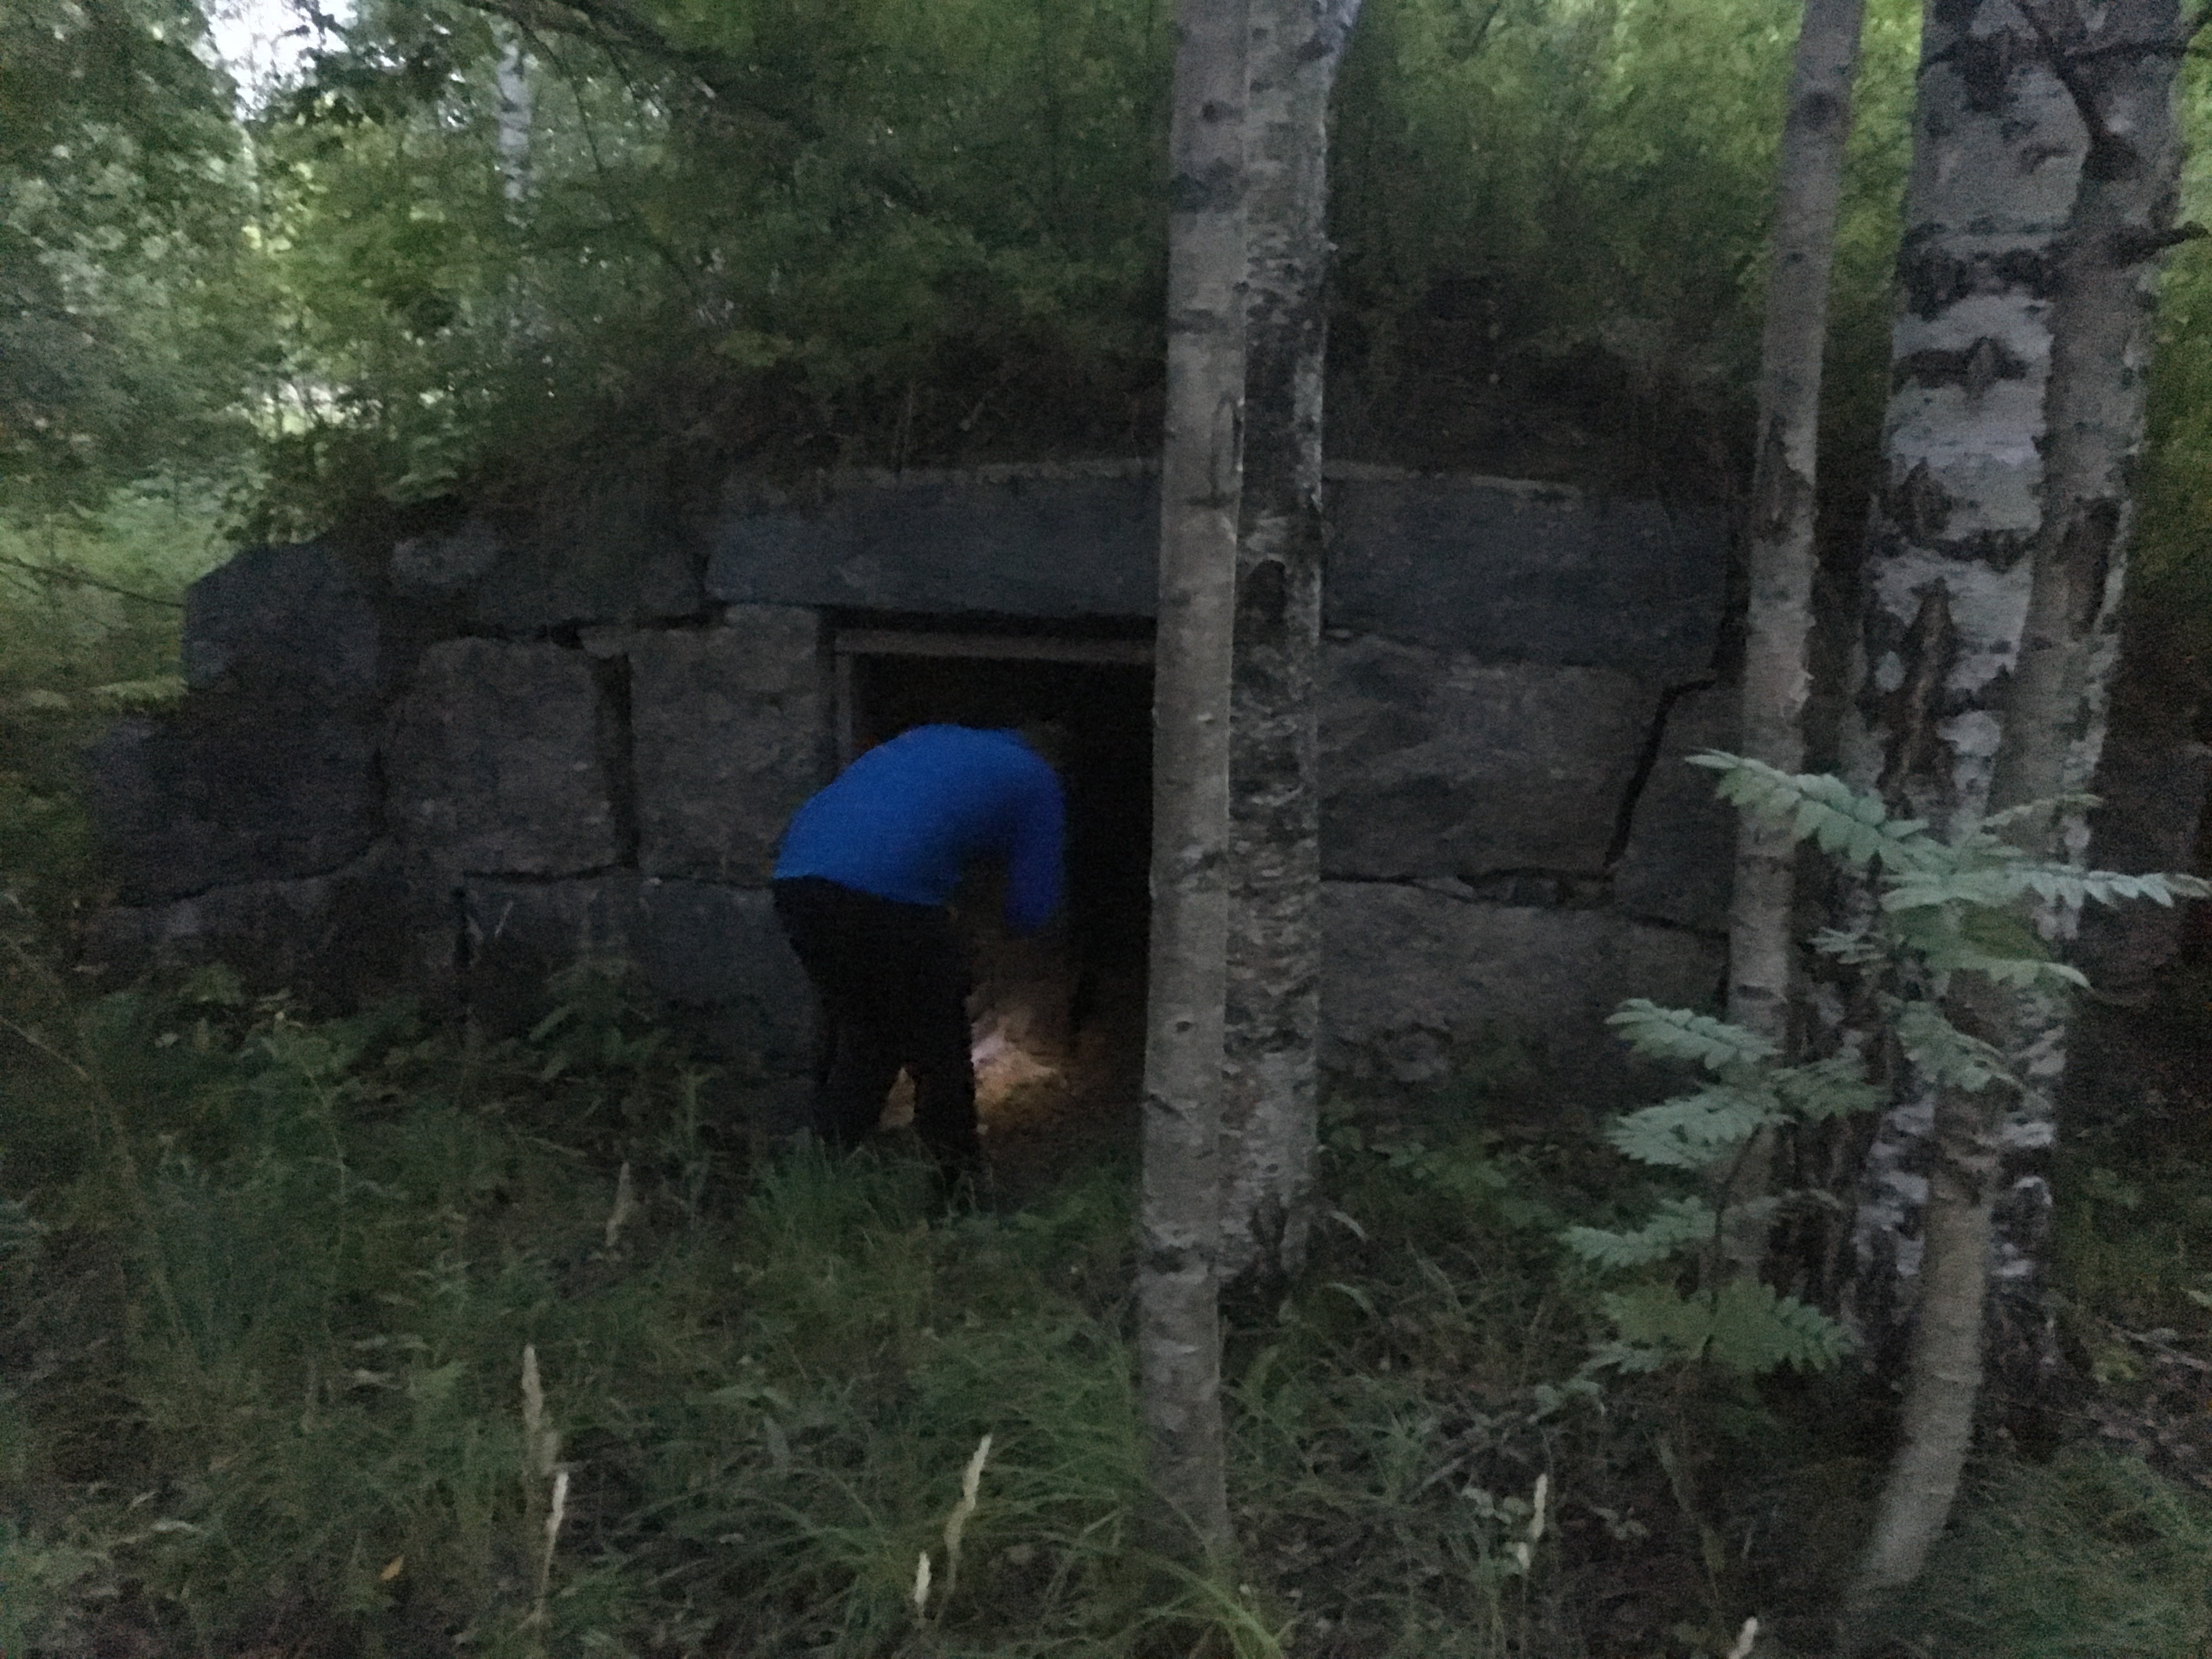 The property also has a root cellar!